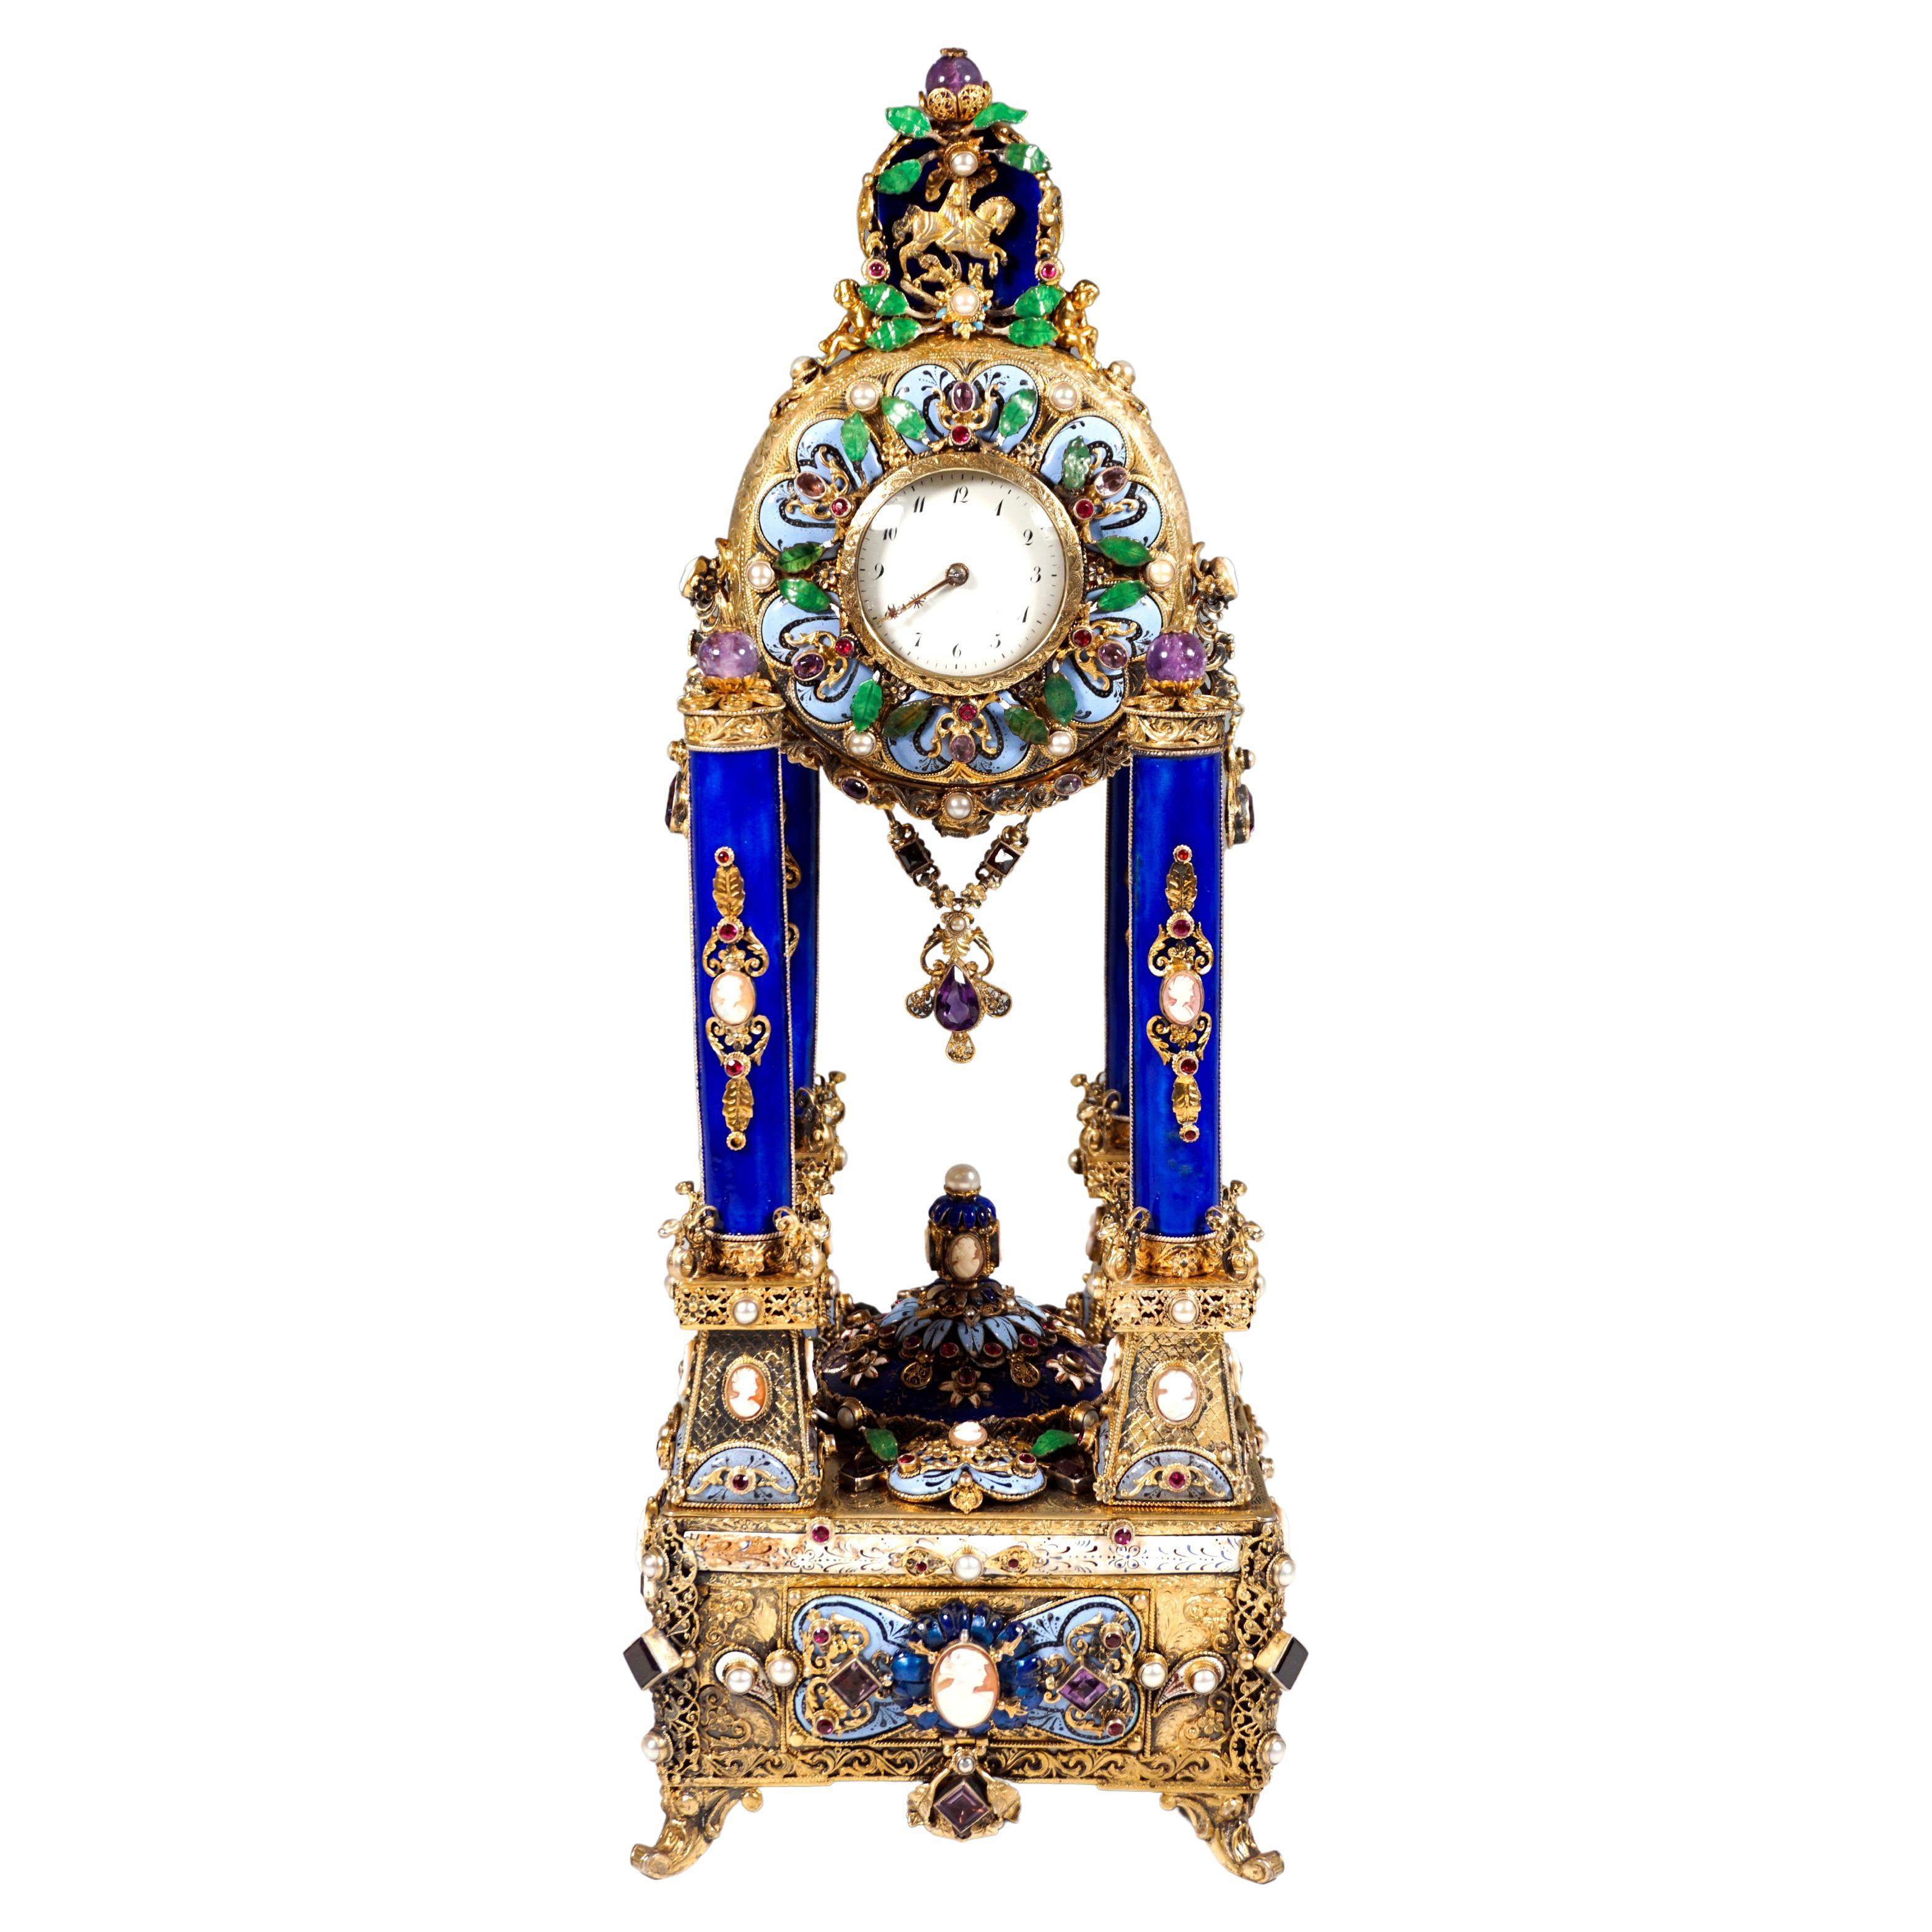 Viennese Silver Historicism Splendour Clock with Musical Movement, Around 1880 For Sale